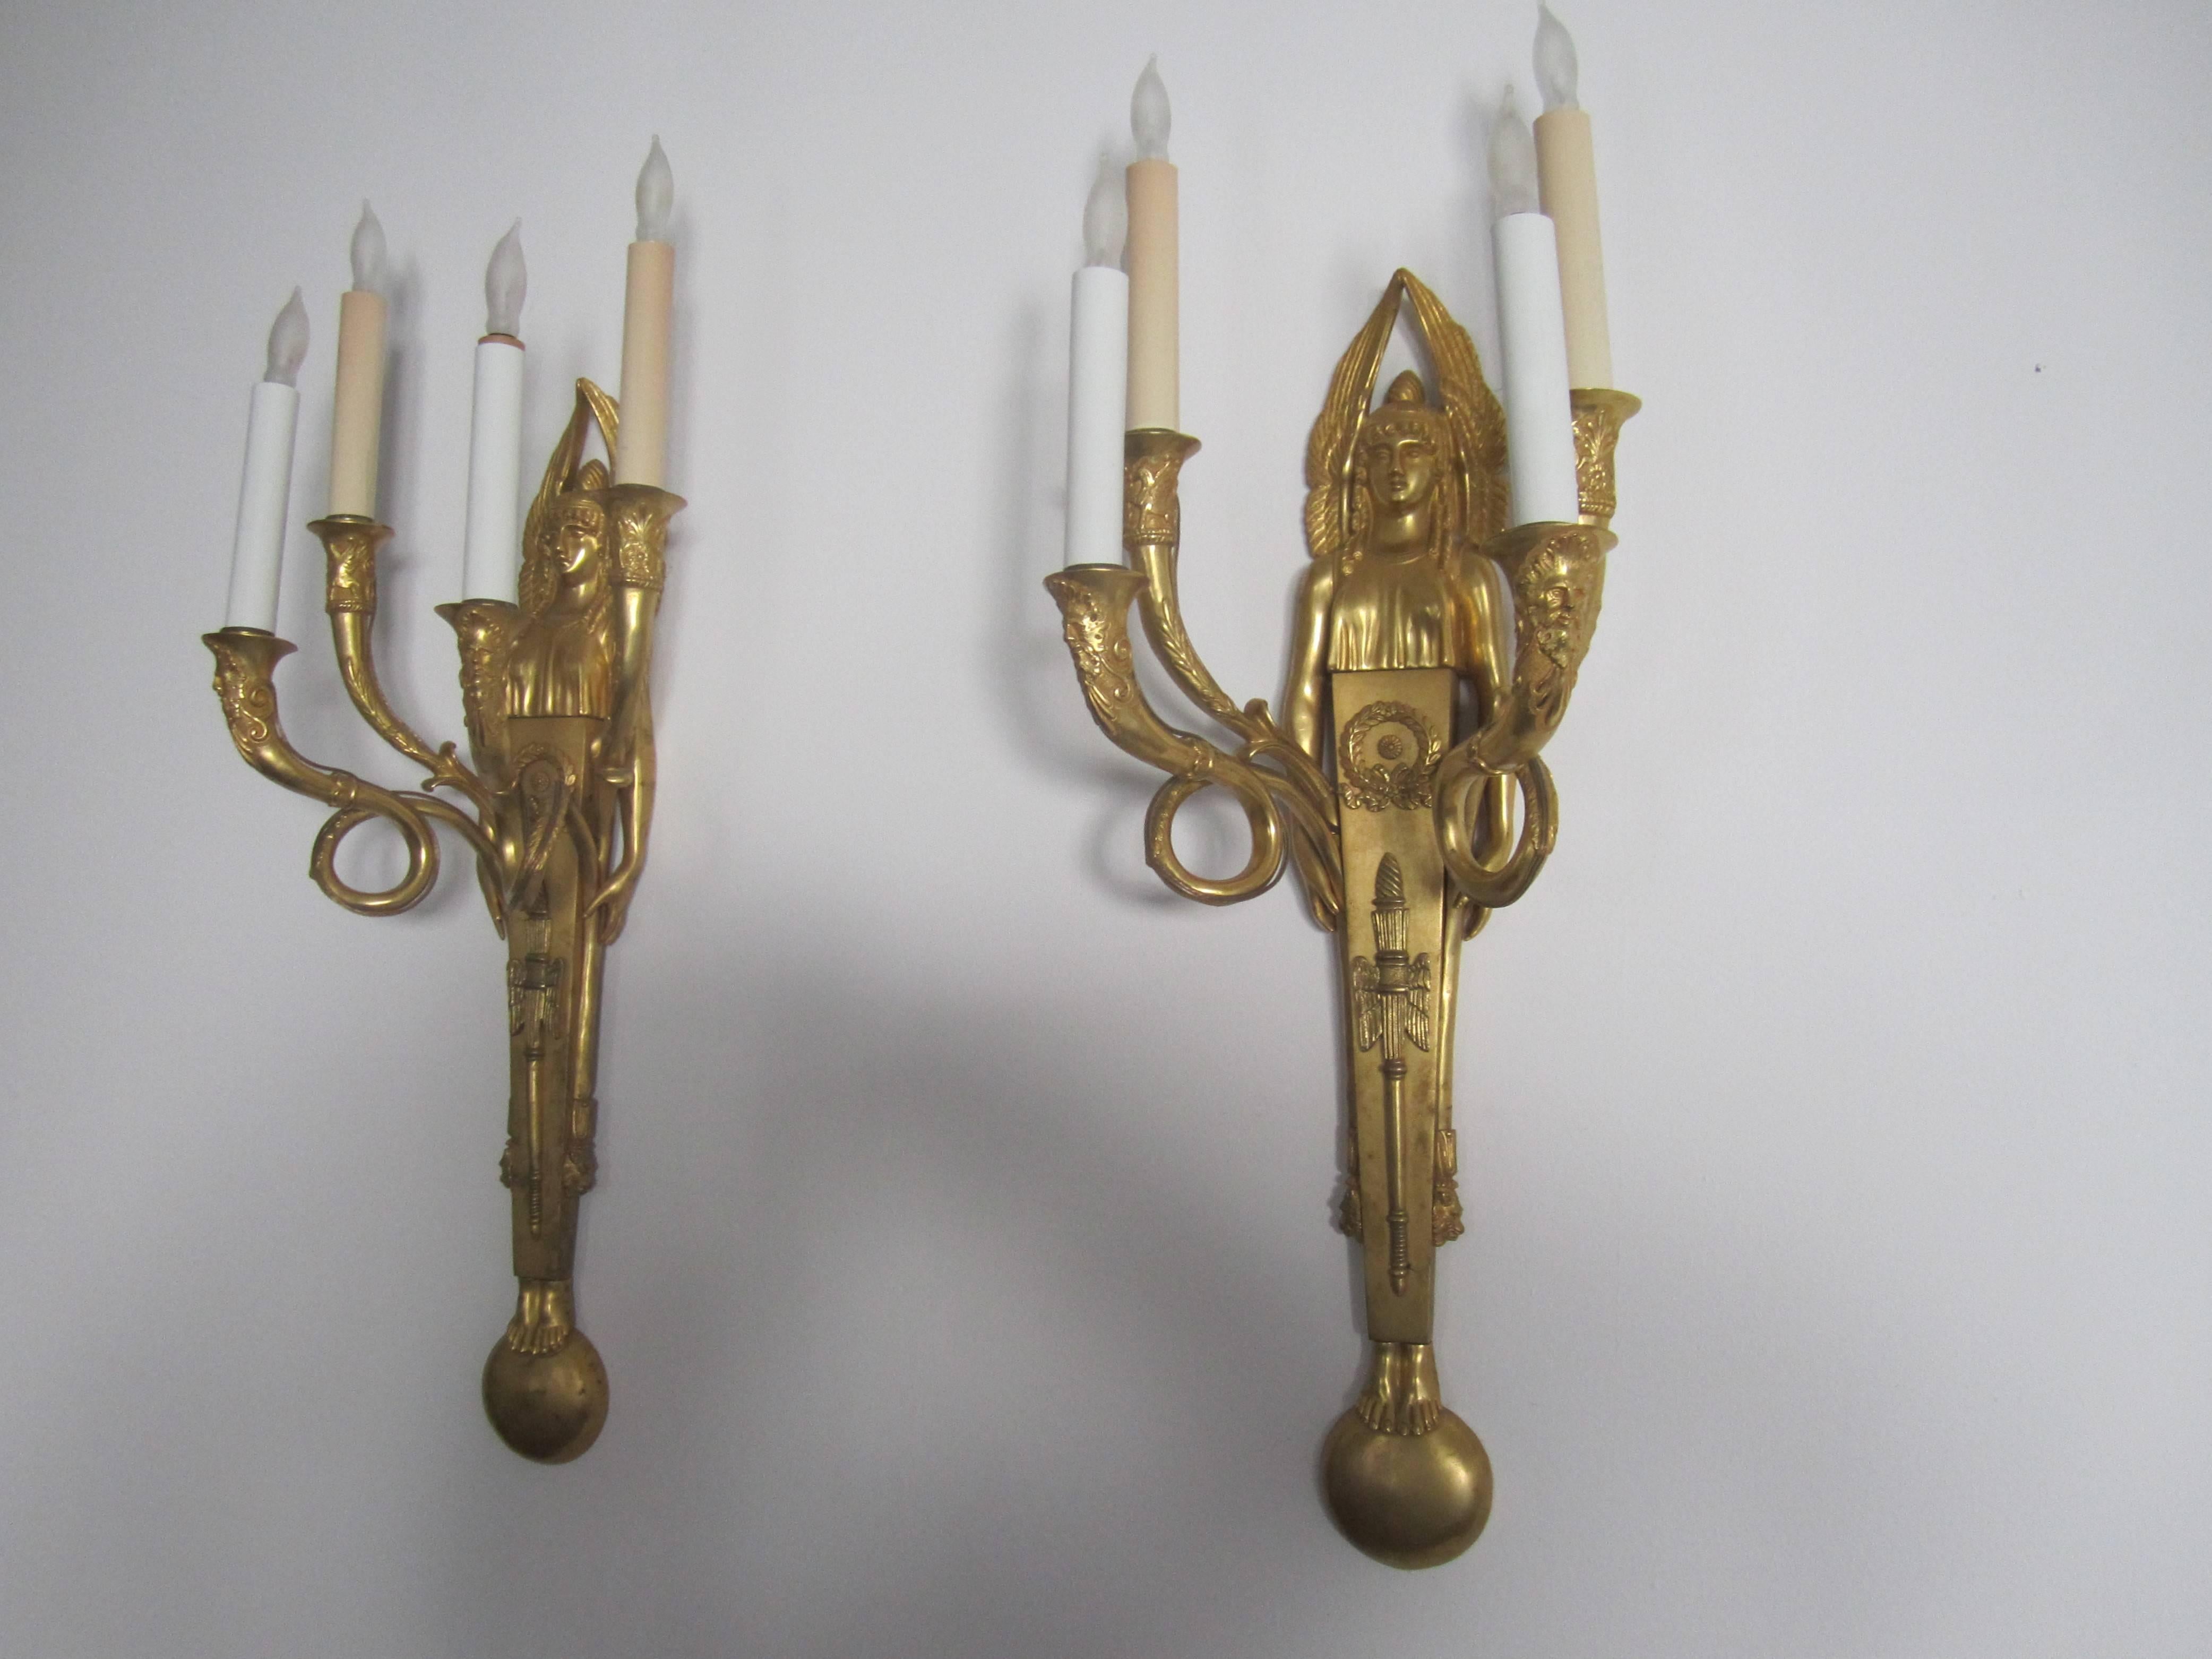  Pair Egyptian Revival Dore Bronze Wall Sconces 2